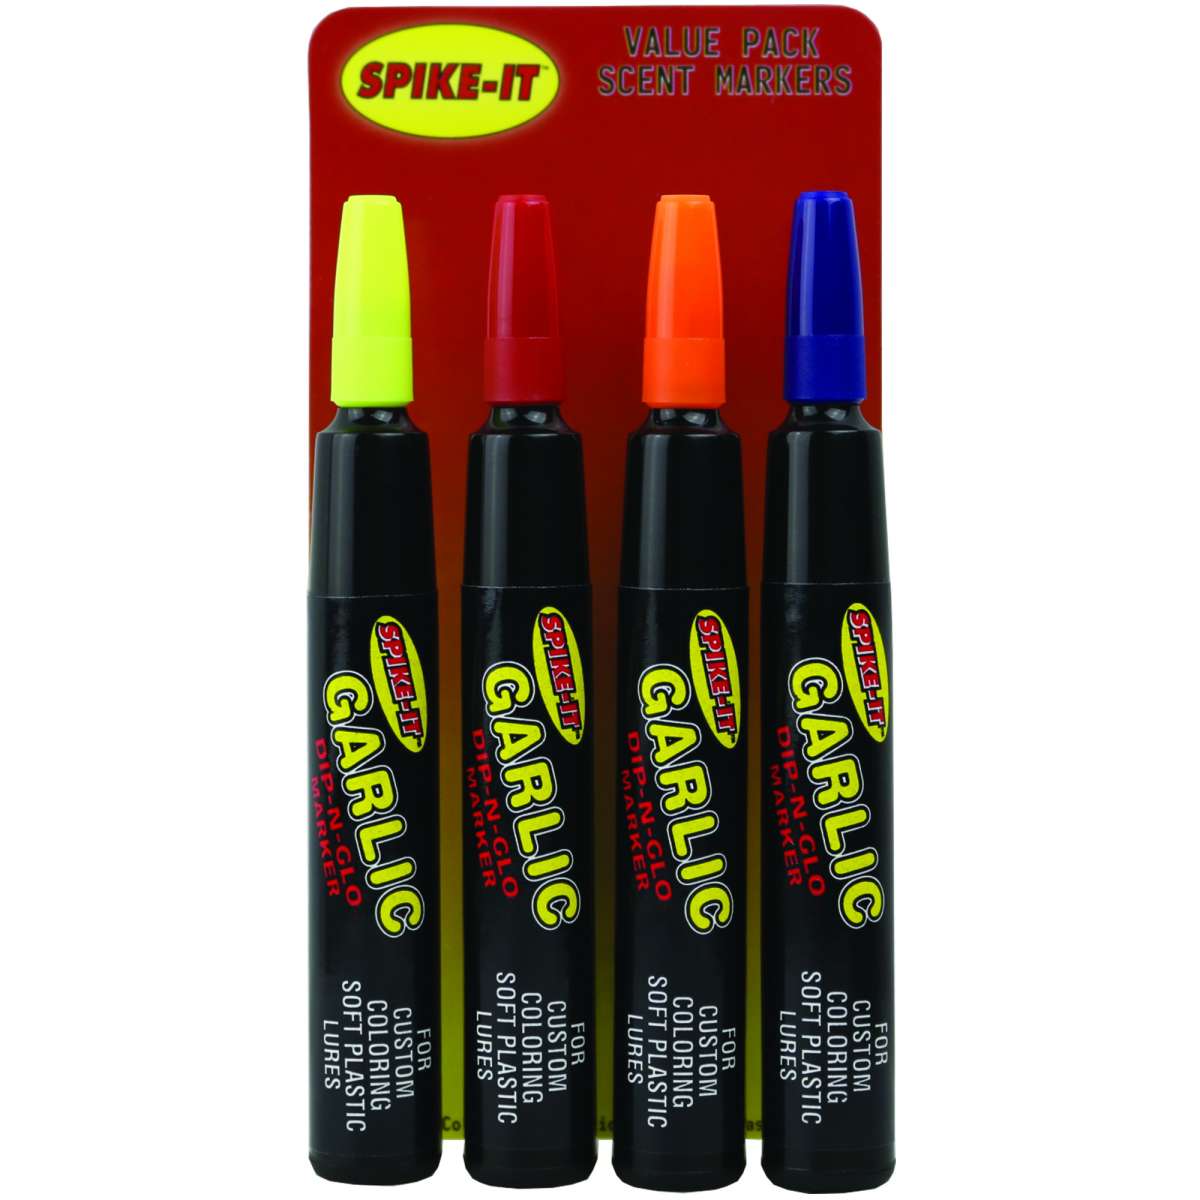 makes better Sharpies than Sharpie, and they're $5.49 for a